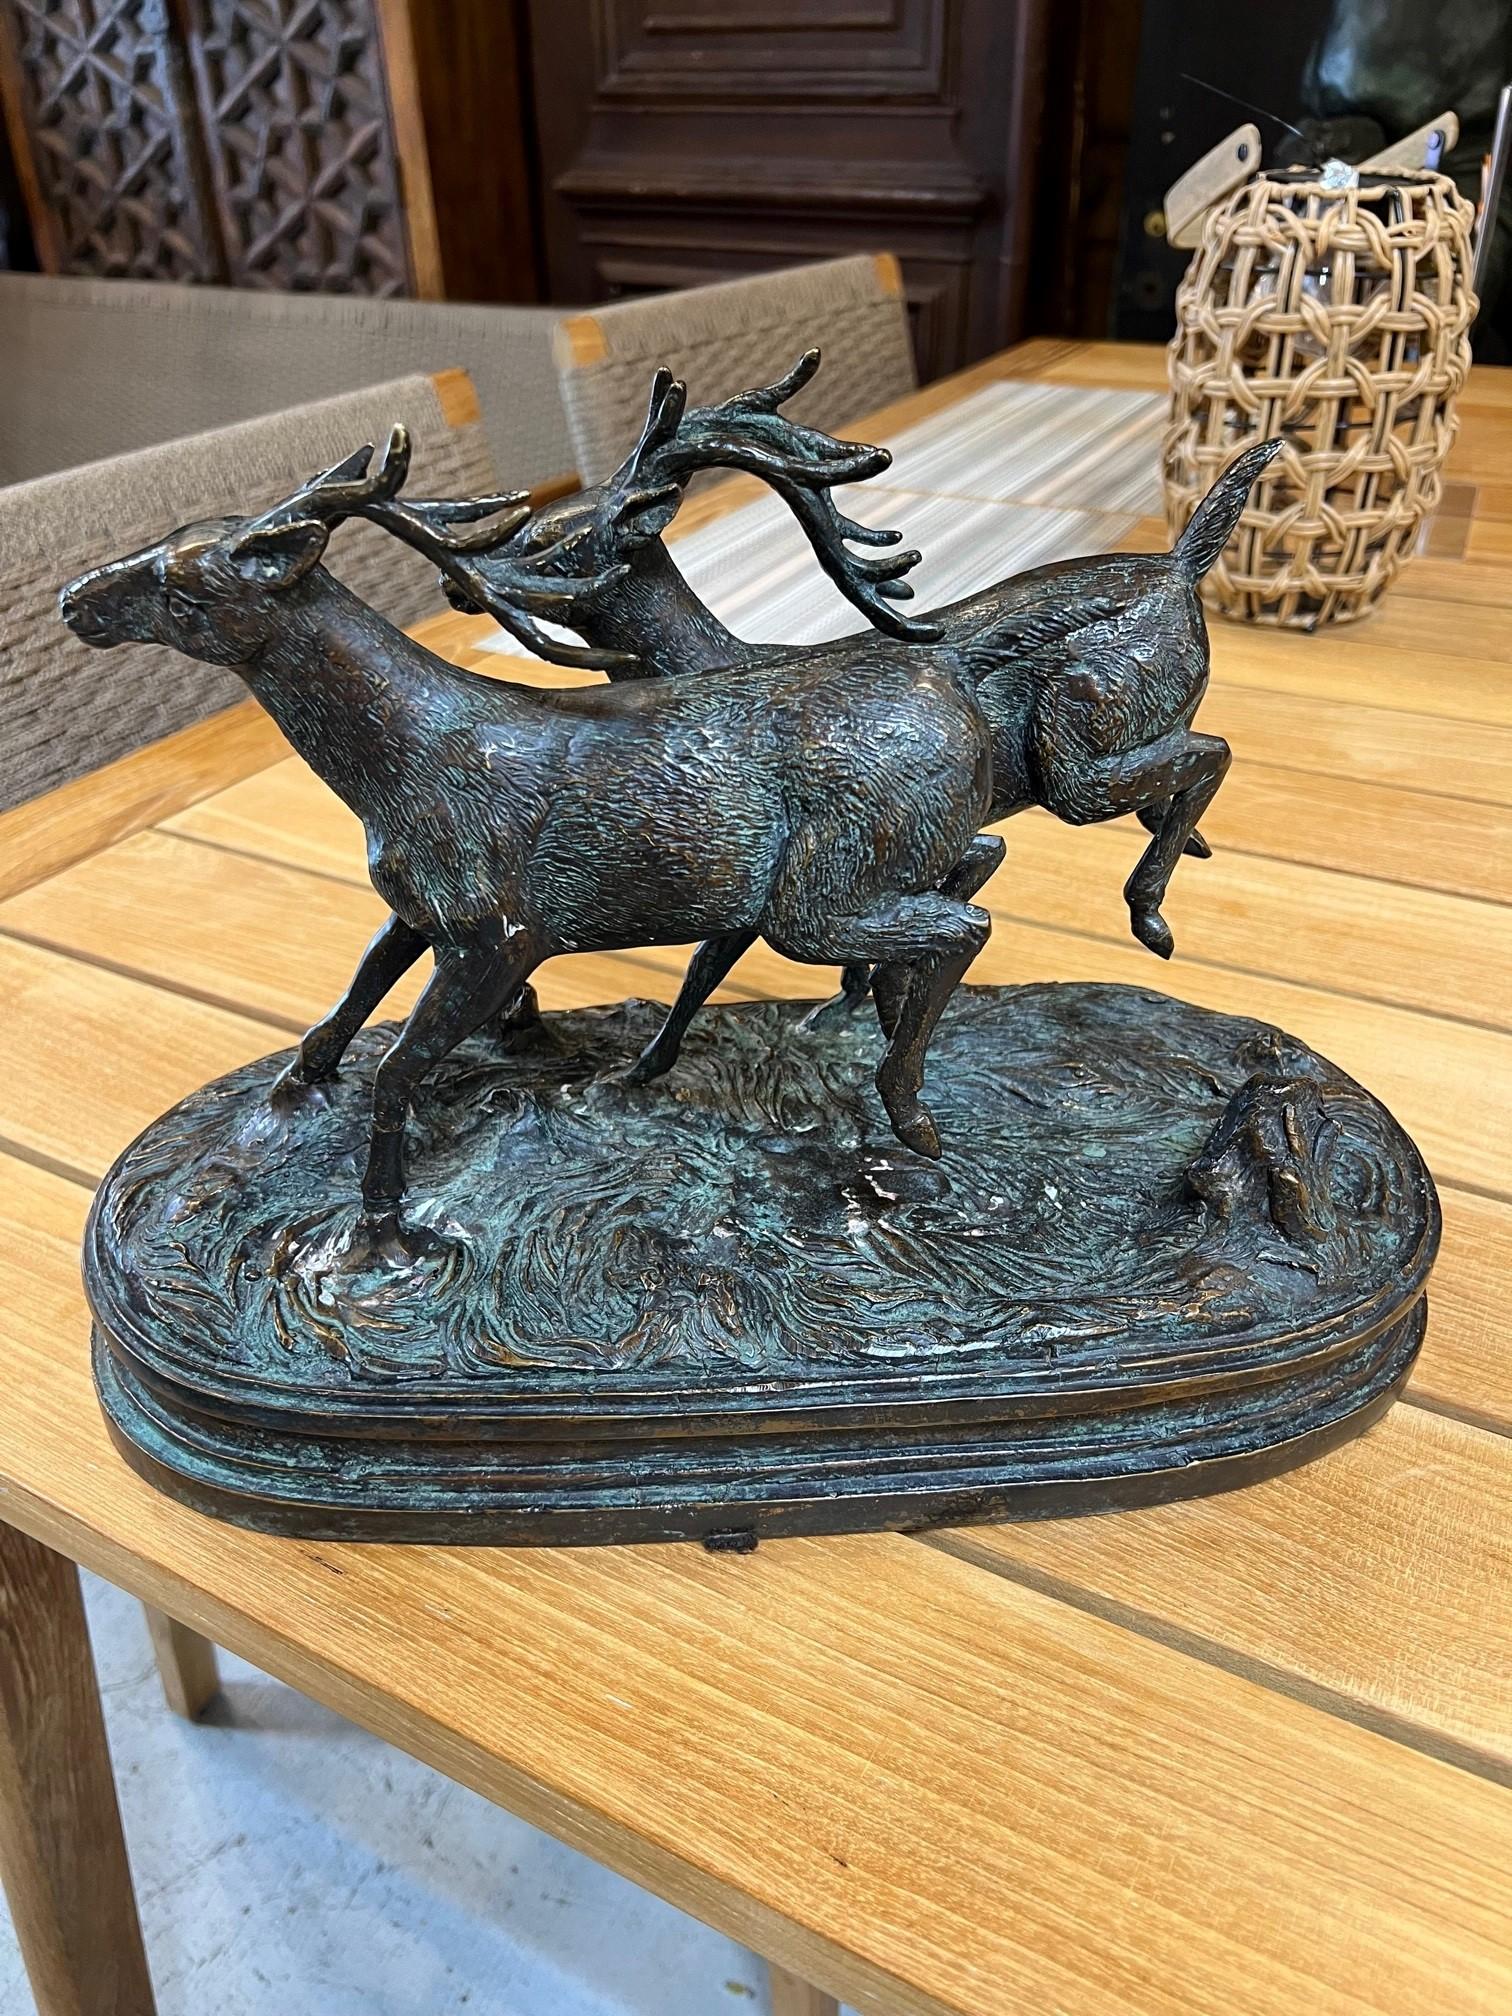 A bronze statue of two deer running with their hind legs kicking up. This is a nice table top bronze of two stags running that would look great on a desk or coffee table. It does not have a signature but is a good quality bronze in good condition.